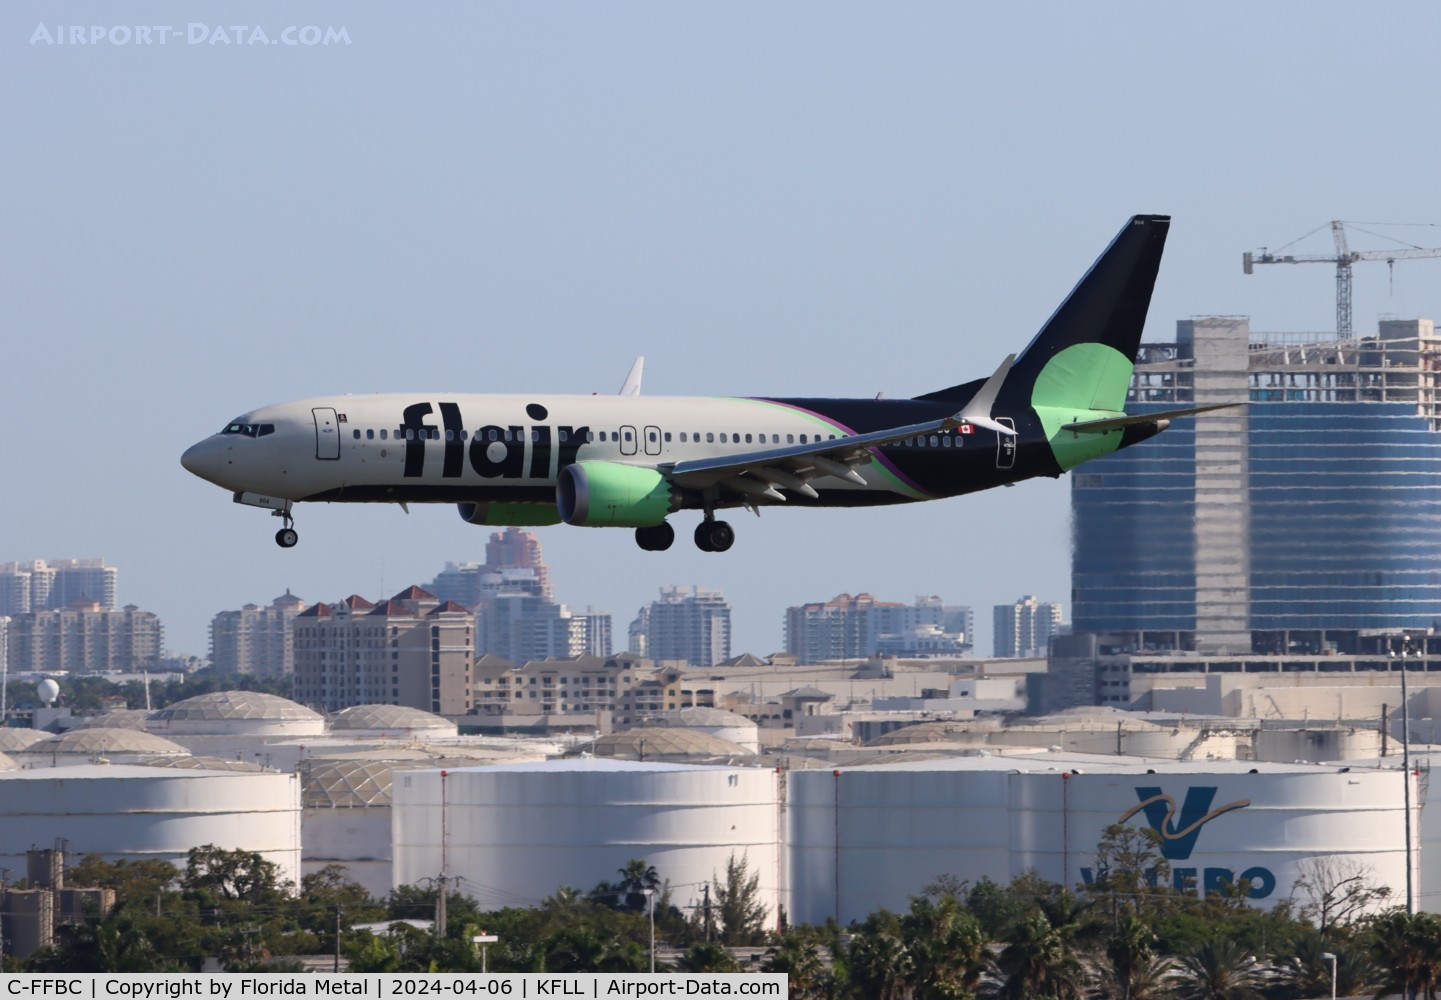 C-FFBC, 2021 Boeing 737-8 C/N 61805, FLE 737-8 zx YYZ /CYYZ - FLL in from Toronto or is that a Rush song?